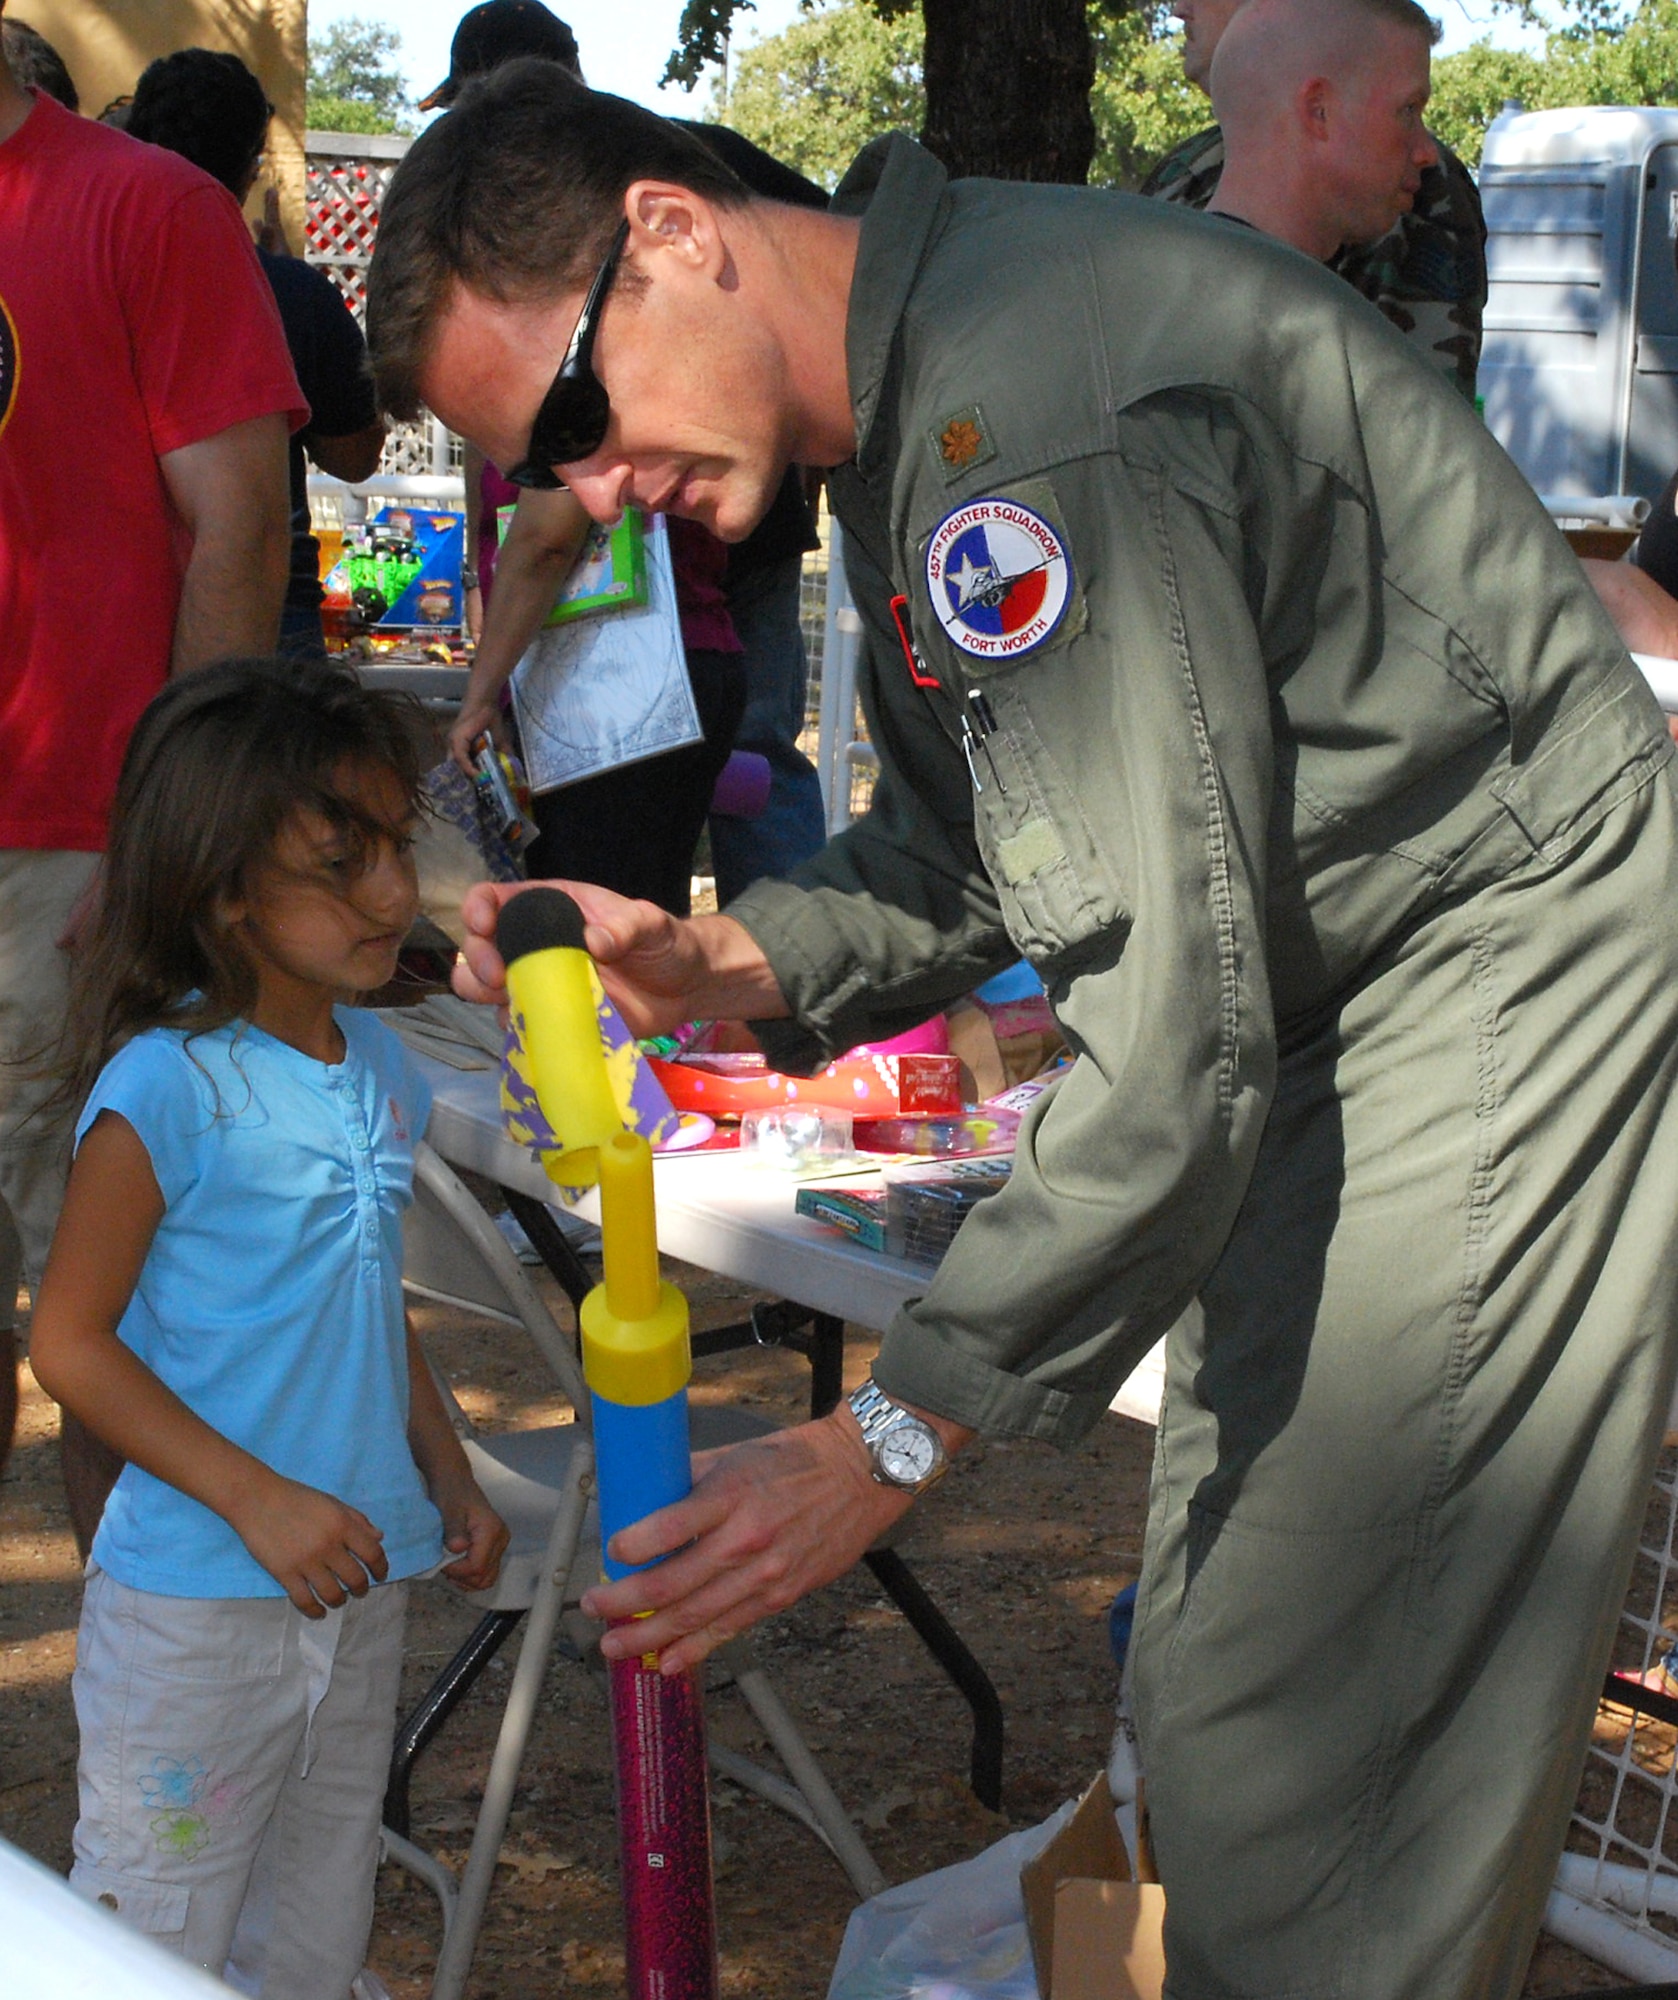 Even 457th Fighter Squadron F-16 pilots gave their time to help the children have fun. Ten booths offered different skill challenges for anyone willing to try free of charge. The picnic was held at the Naval Air Station Joint Reserve Base Fort Worth, Texas. (U.S. Air Force Photo/Tech. Sgt. Julie Briden-Garcia)